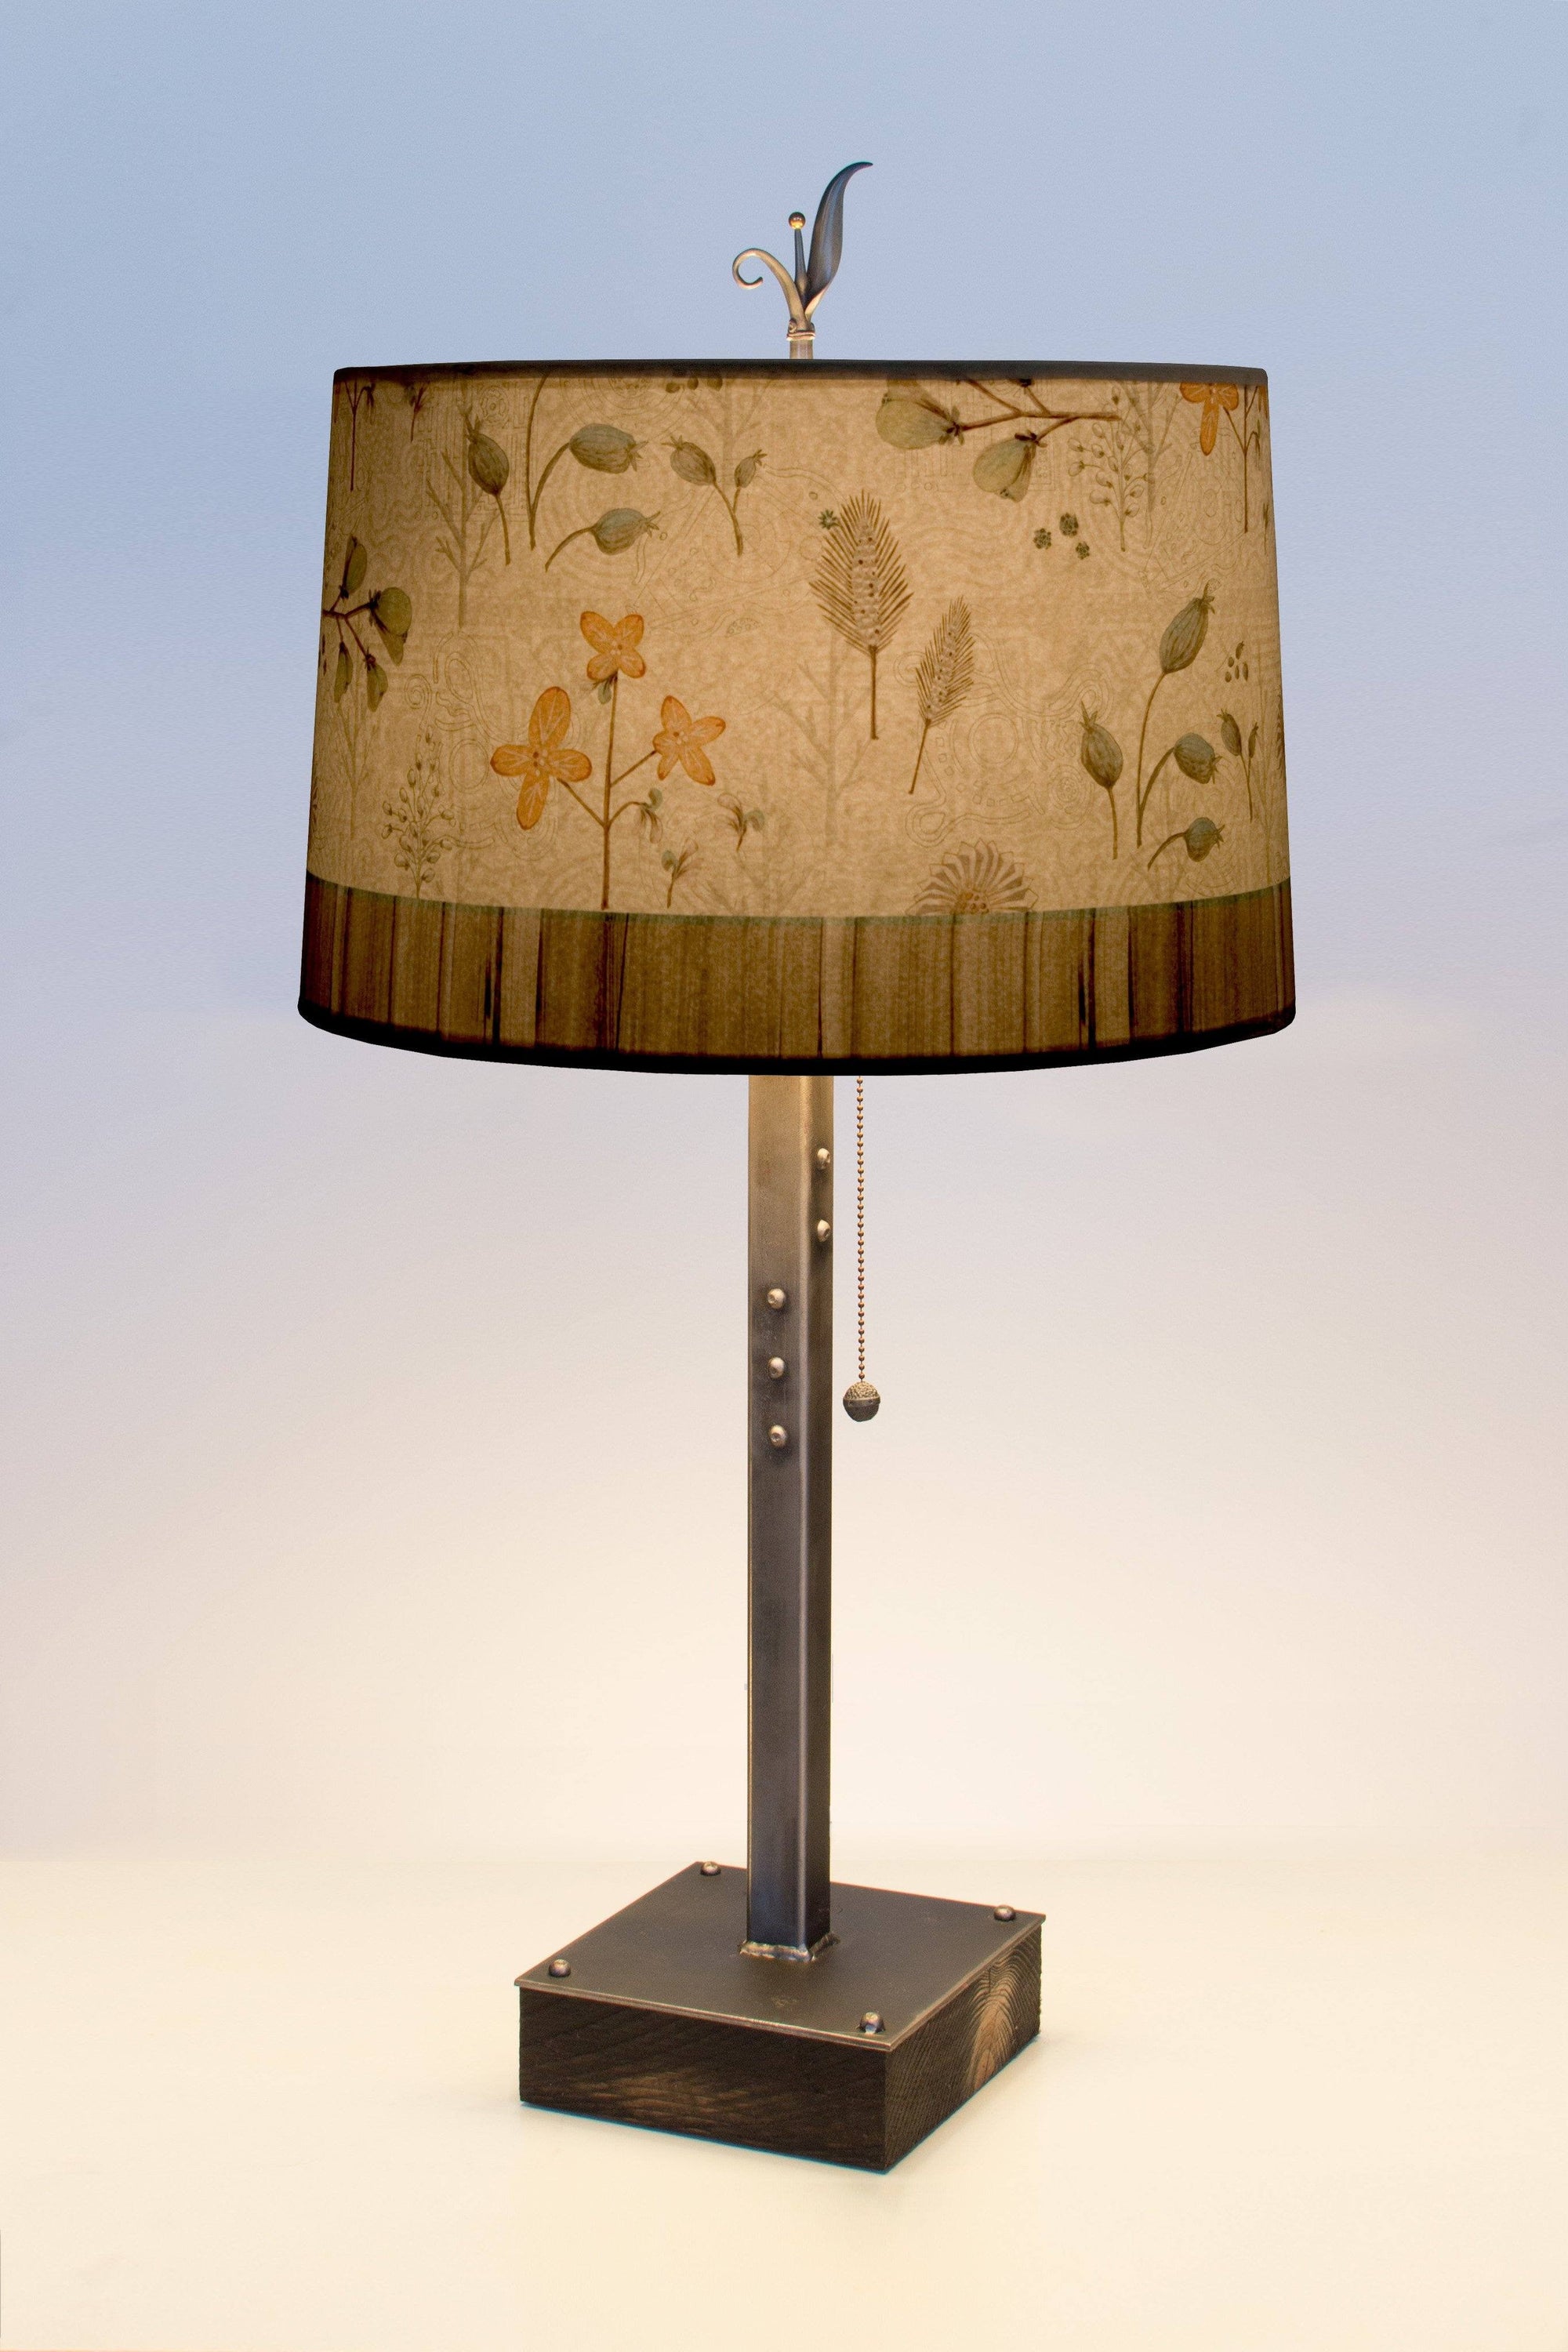 Janna Ugone & Co Table Lamps Steel Table Lamp on Wood with Large Drum Shade in Flora and Maze